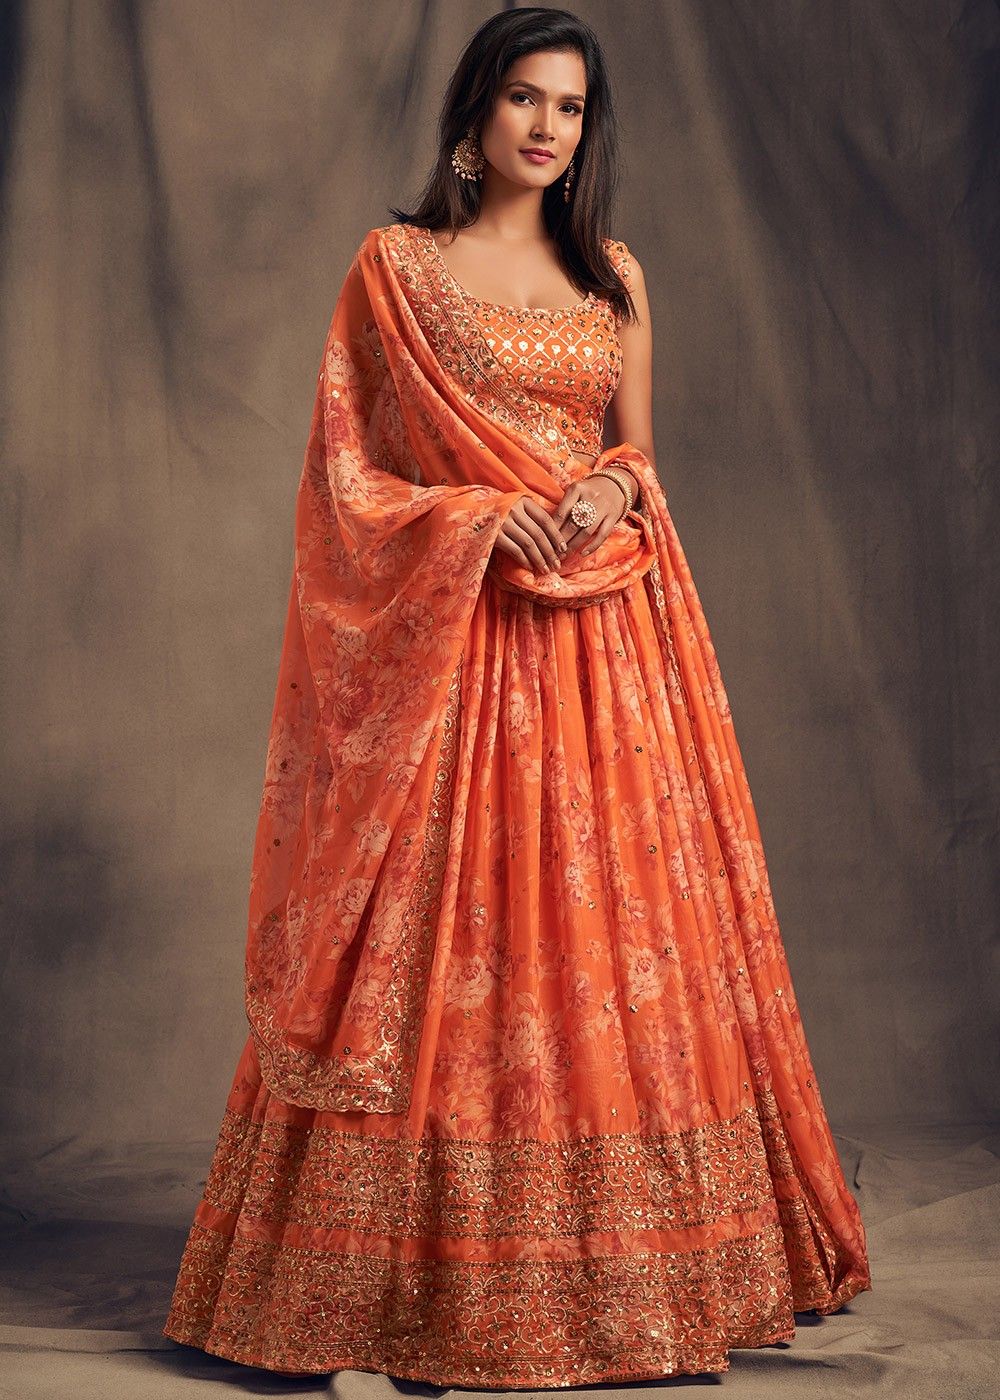 Amazon Republic Day Sale: Avail discount of up to 74% on lehenga cholis |  HT Shop Now